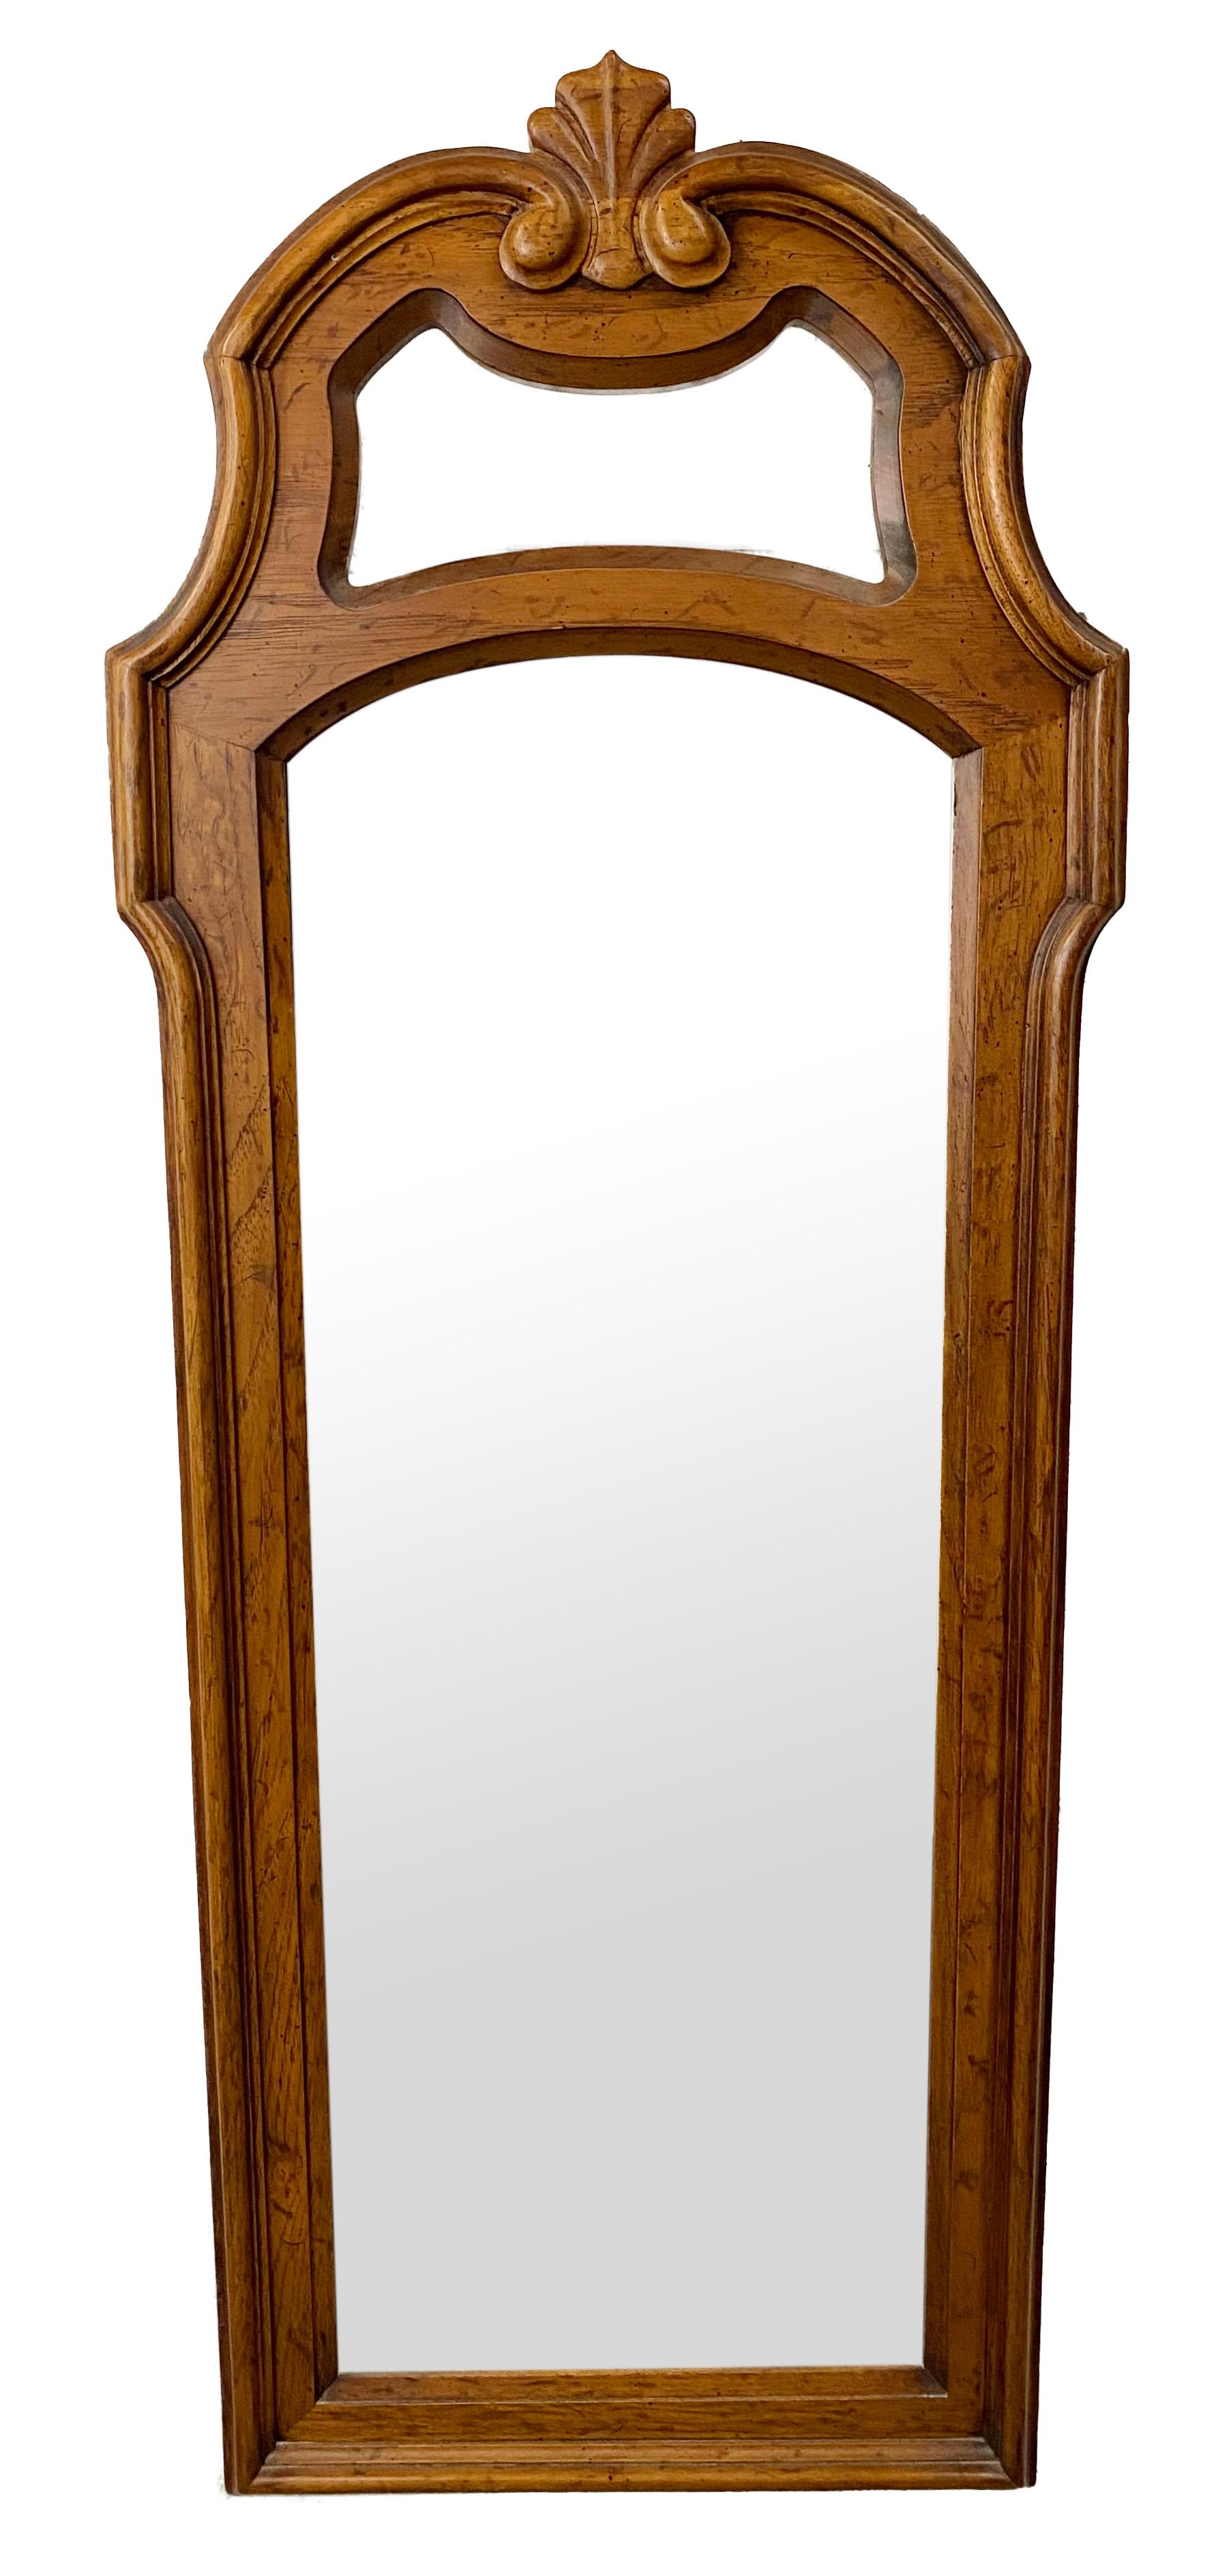 A pair of French provincial wall tall mirrors by Drexel Heritage. The quality mirrors 'frame is finely carved of pine wood showing beautiful natural grain. The mirrors are embellished with a large acanthus in the top and feature nice carving